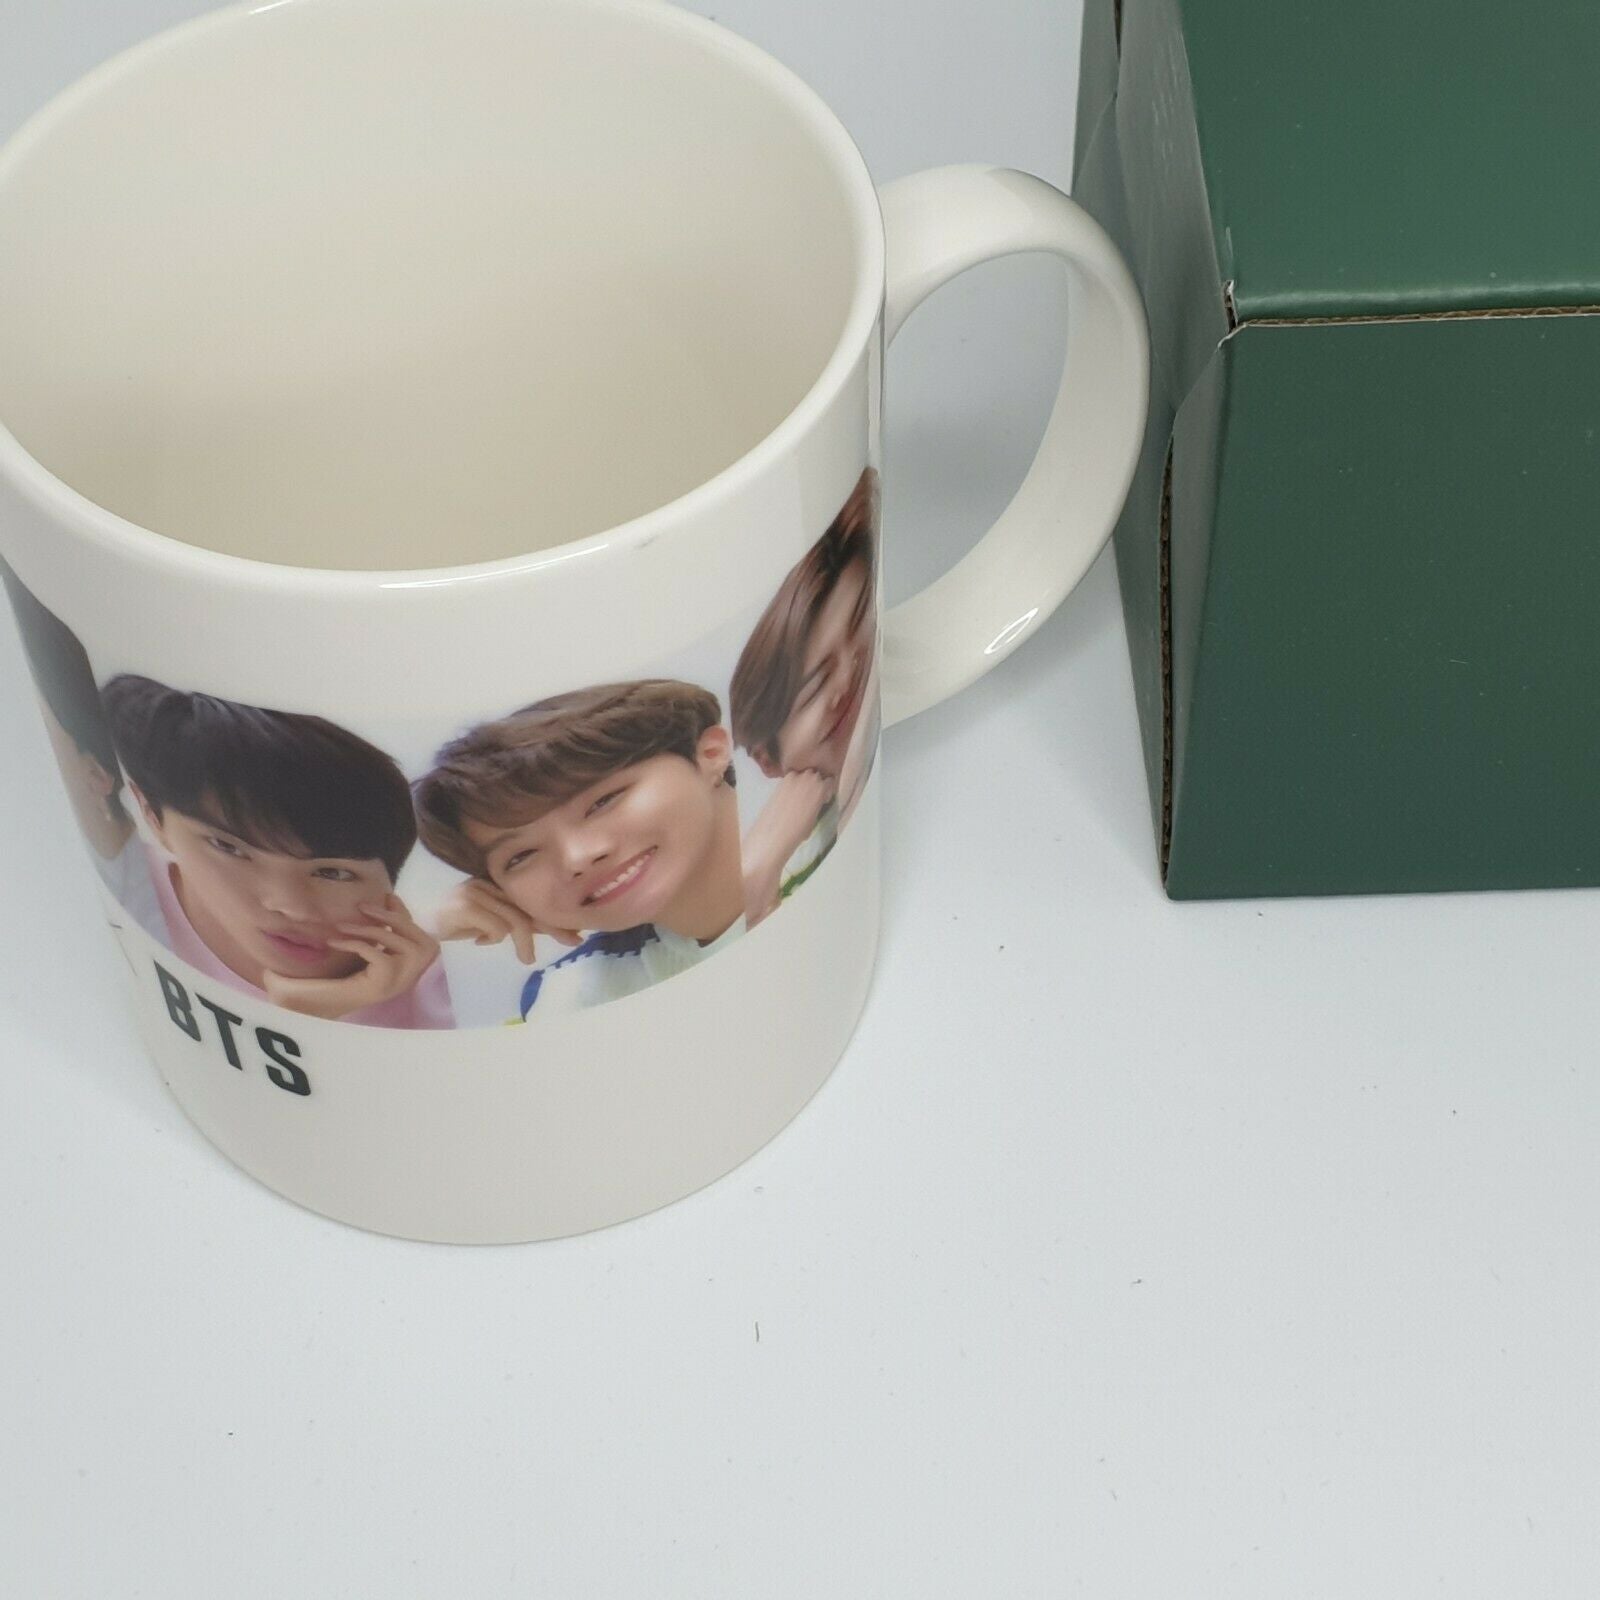 BTS Chilsung Cider Official Mugs Cups Limited Rare Concert KPOP Goods